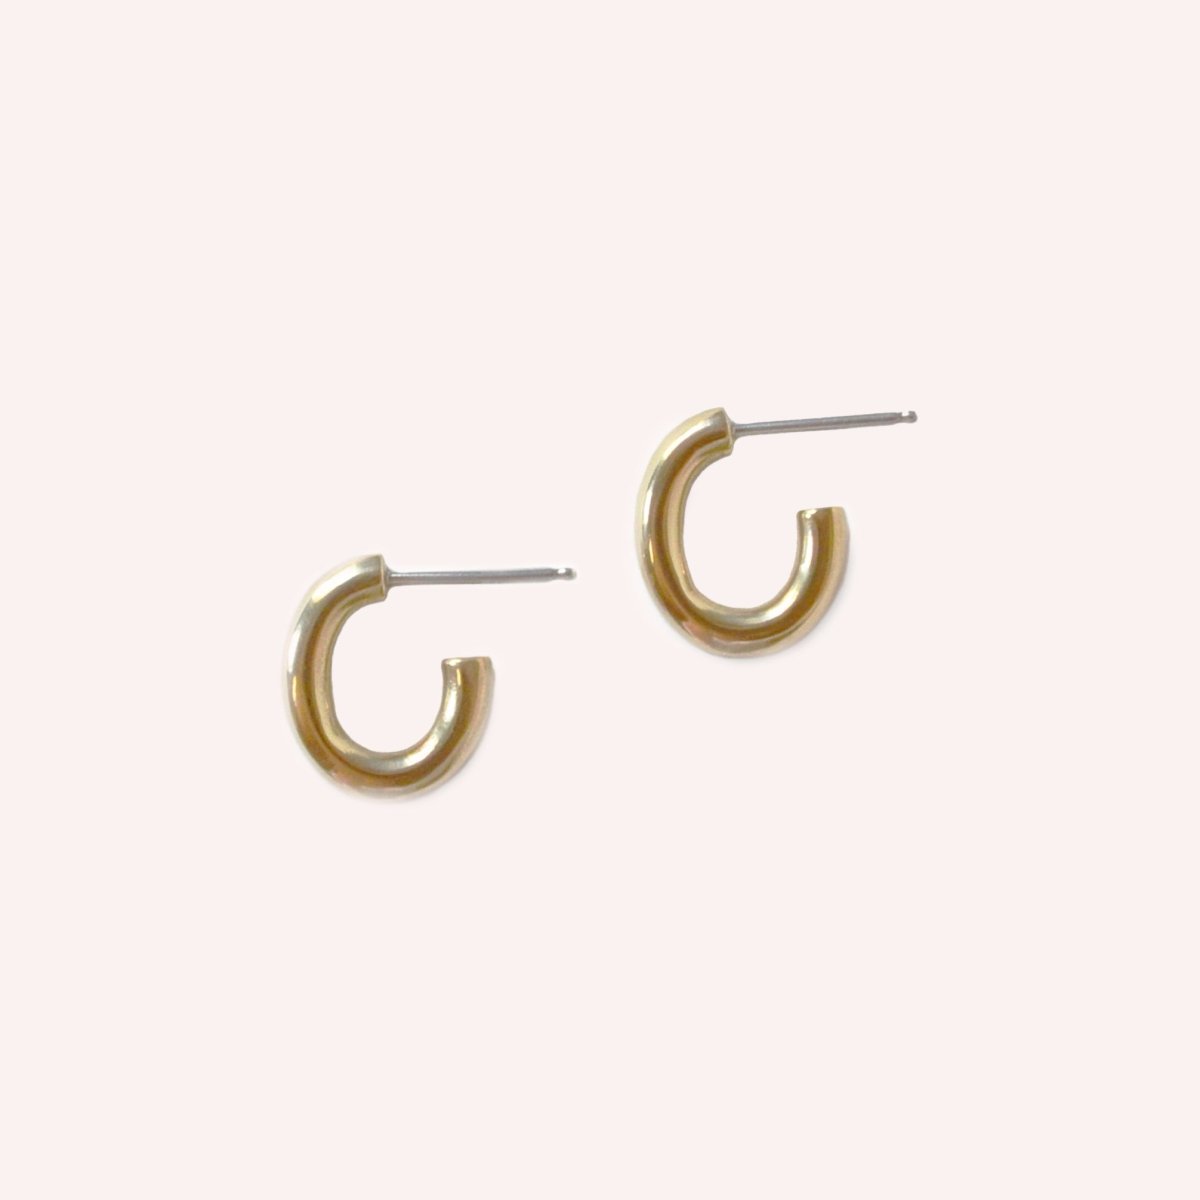 A smooth gold tone oval shaped hoop with sterling silver earring posts. The Pool Hoops in Brass are designed and handcrafted by Natalie Joy in Portland, Oregon.